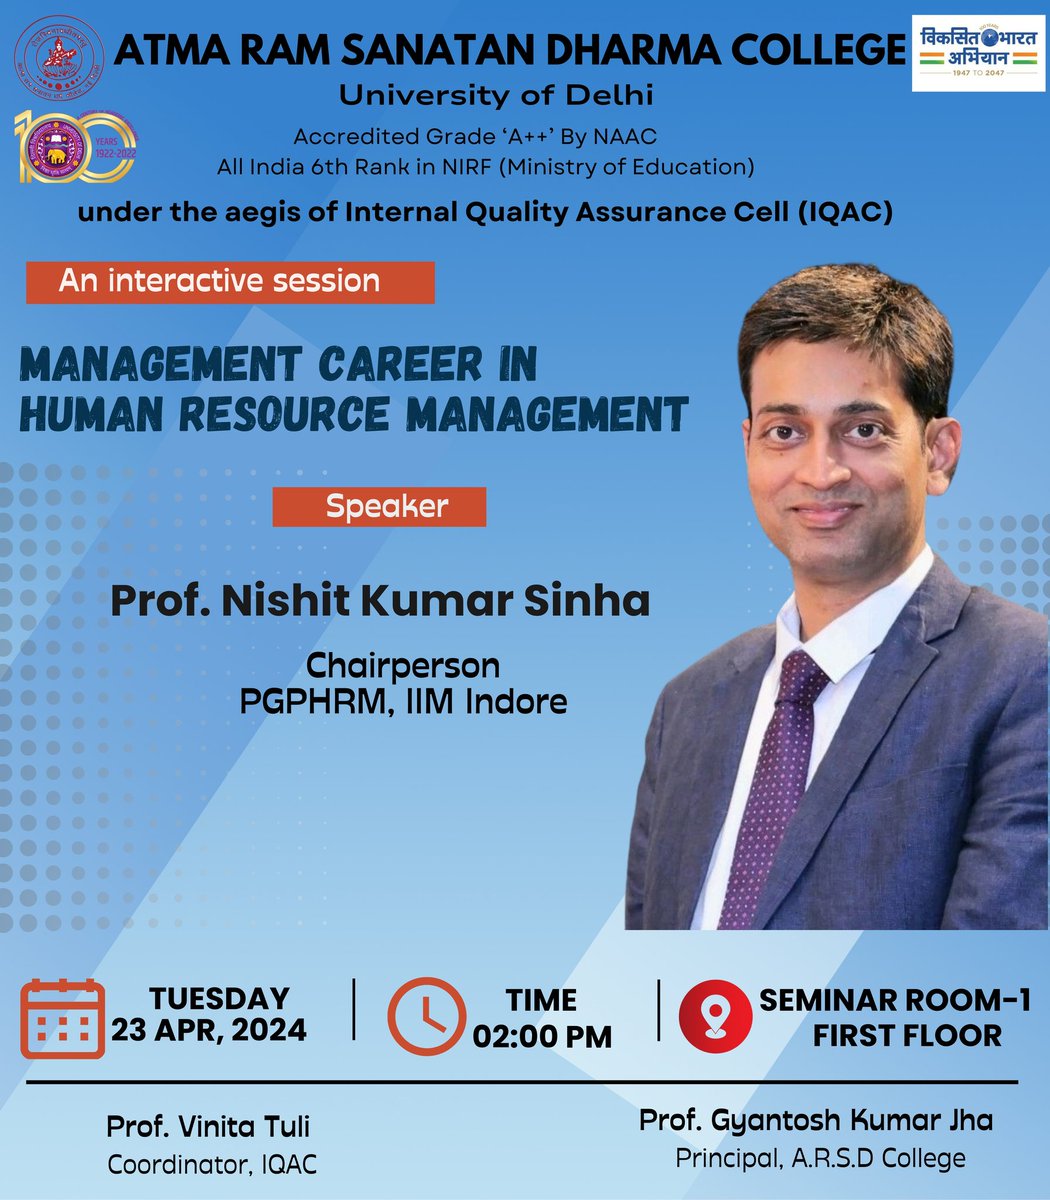 @arsdcollegedu #IQAC is organising an Interactive Session on 'Management Career in Human Resource Management' with Prof. Nishit Kumar Sinha, Chairperson PGPHRM , IIM Indore